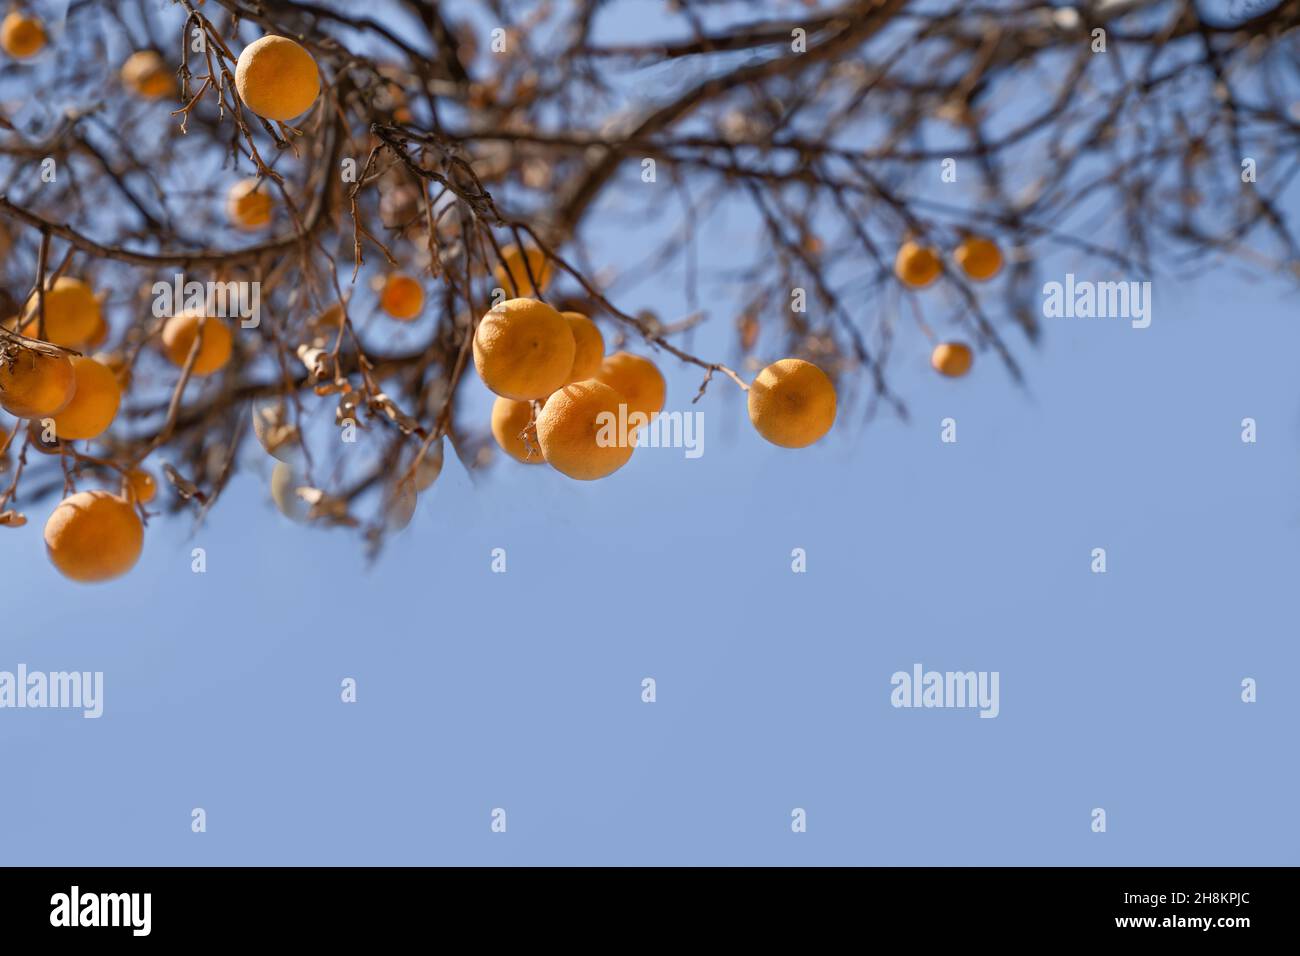 Oranges hang on dry branches without leaves against a blue sky. Concept of autumn, health and ecology. Copy space. Stock Photo